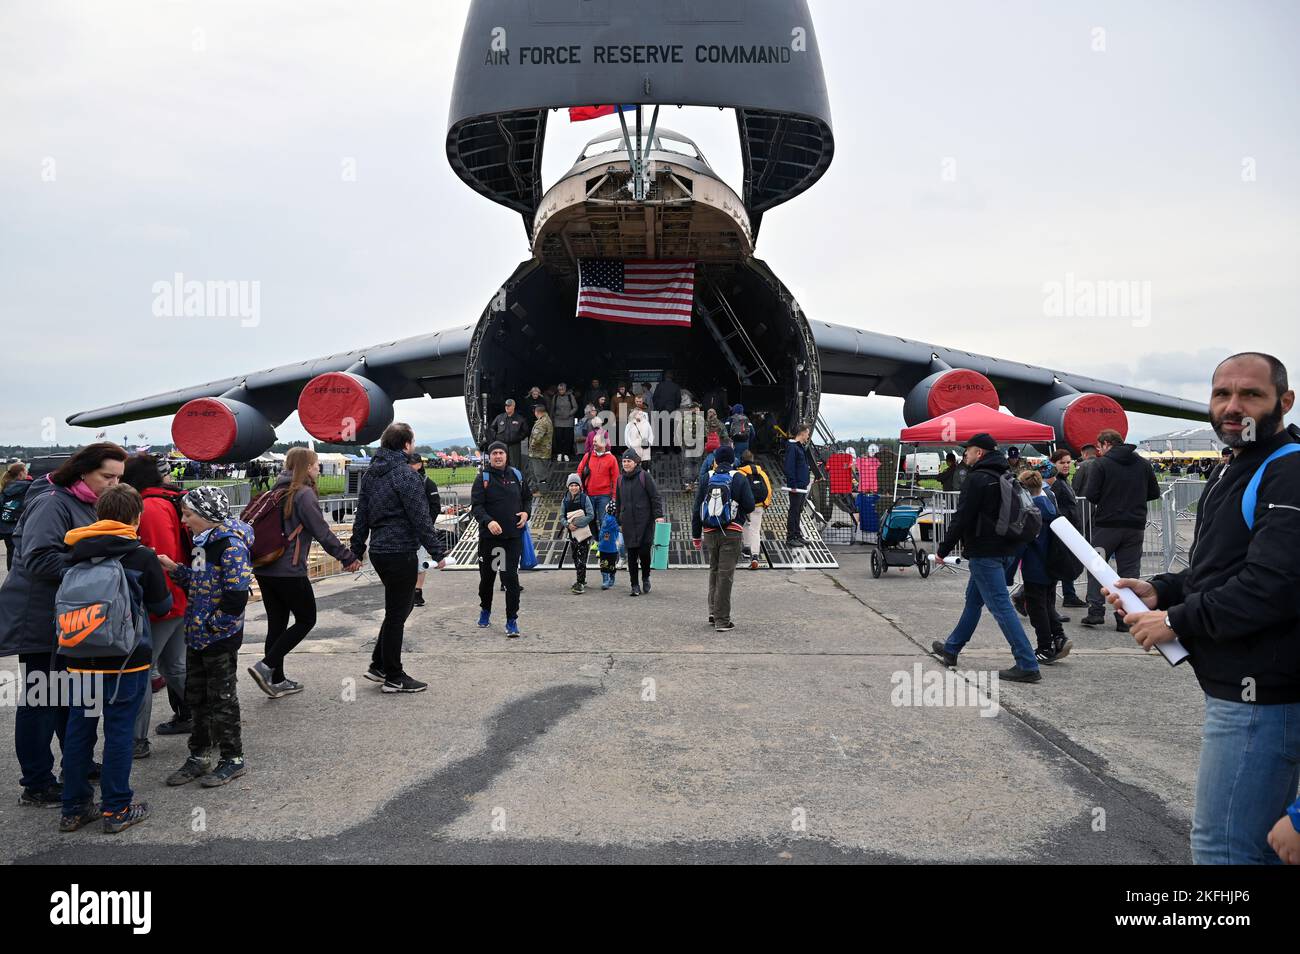 Guests walk through a C-5M Super Galaxy aircraft during the NATO Days air show in Ostrava, Czech Republic, Sept. 17, 2022. More than 110,000 people attended the event over two days. Stock Photo